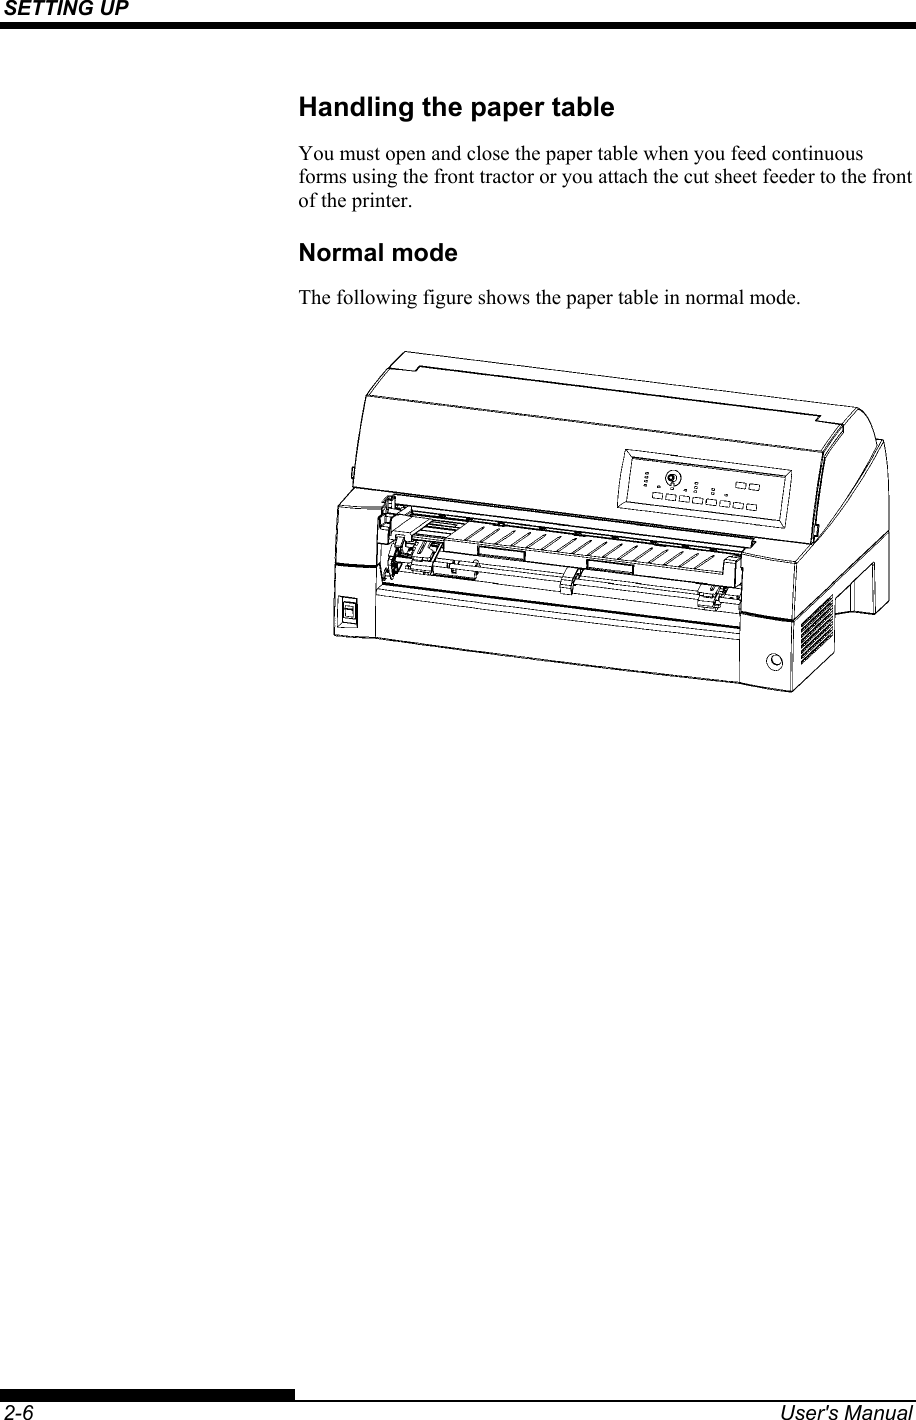 SETTING UP    2-6  User&apos;s Manual Handling the paper table You must open and close the paper table when you feed continuous forms using the front tractor or you attach the cut sheet feeder to the front of the printer. Normal mode The following figure shows the paper table in normal mode.  